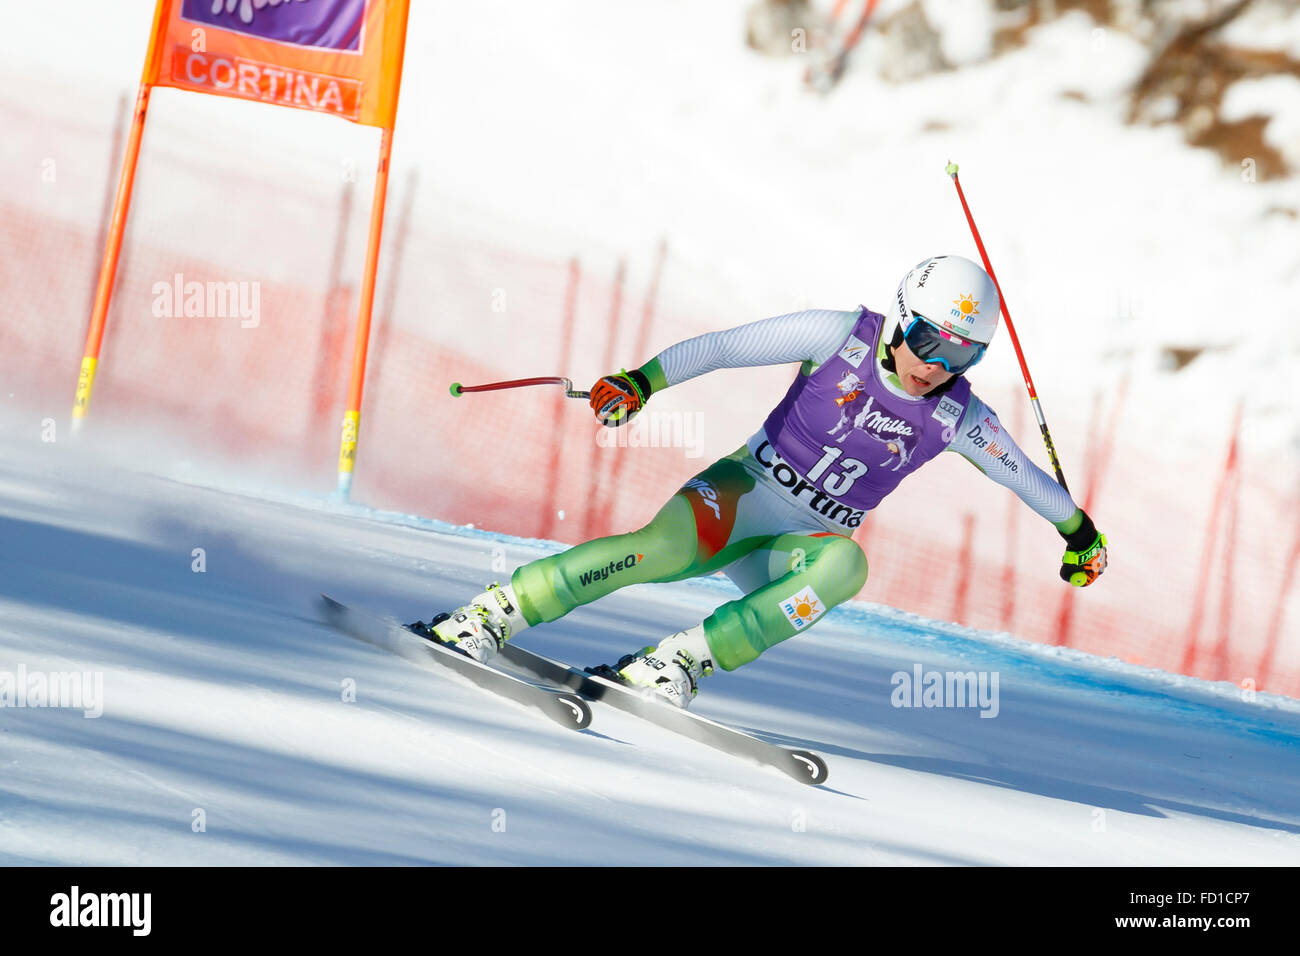 Cortina d’Ampezzo, Italy 23 January 2016. MIKLOS Edit (Hun) competing in the Audi Fis Alpine Skiing World Cup Women’s downhill Stock Photo